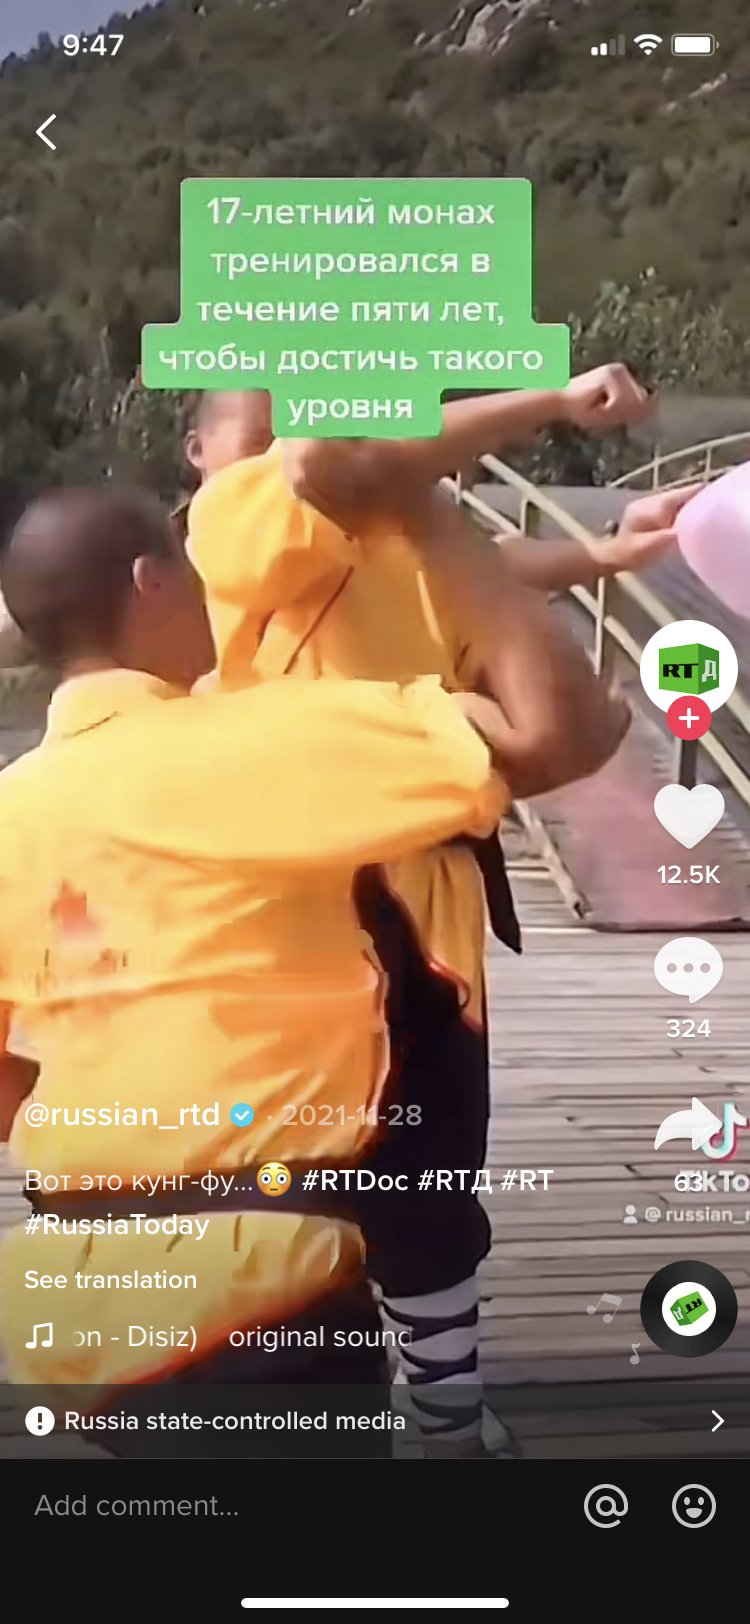 A screenshot of a TikTok from the official RT account shown with a 'state-controlled media' label.